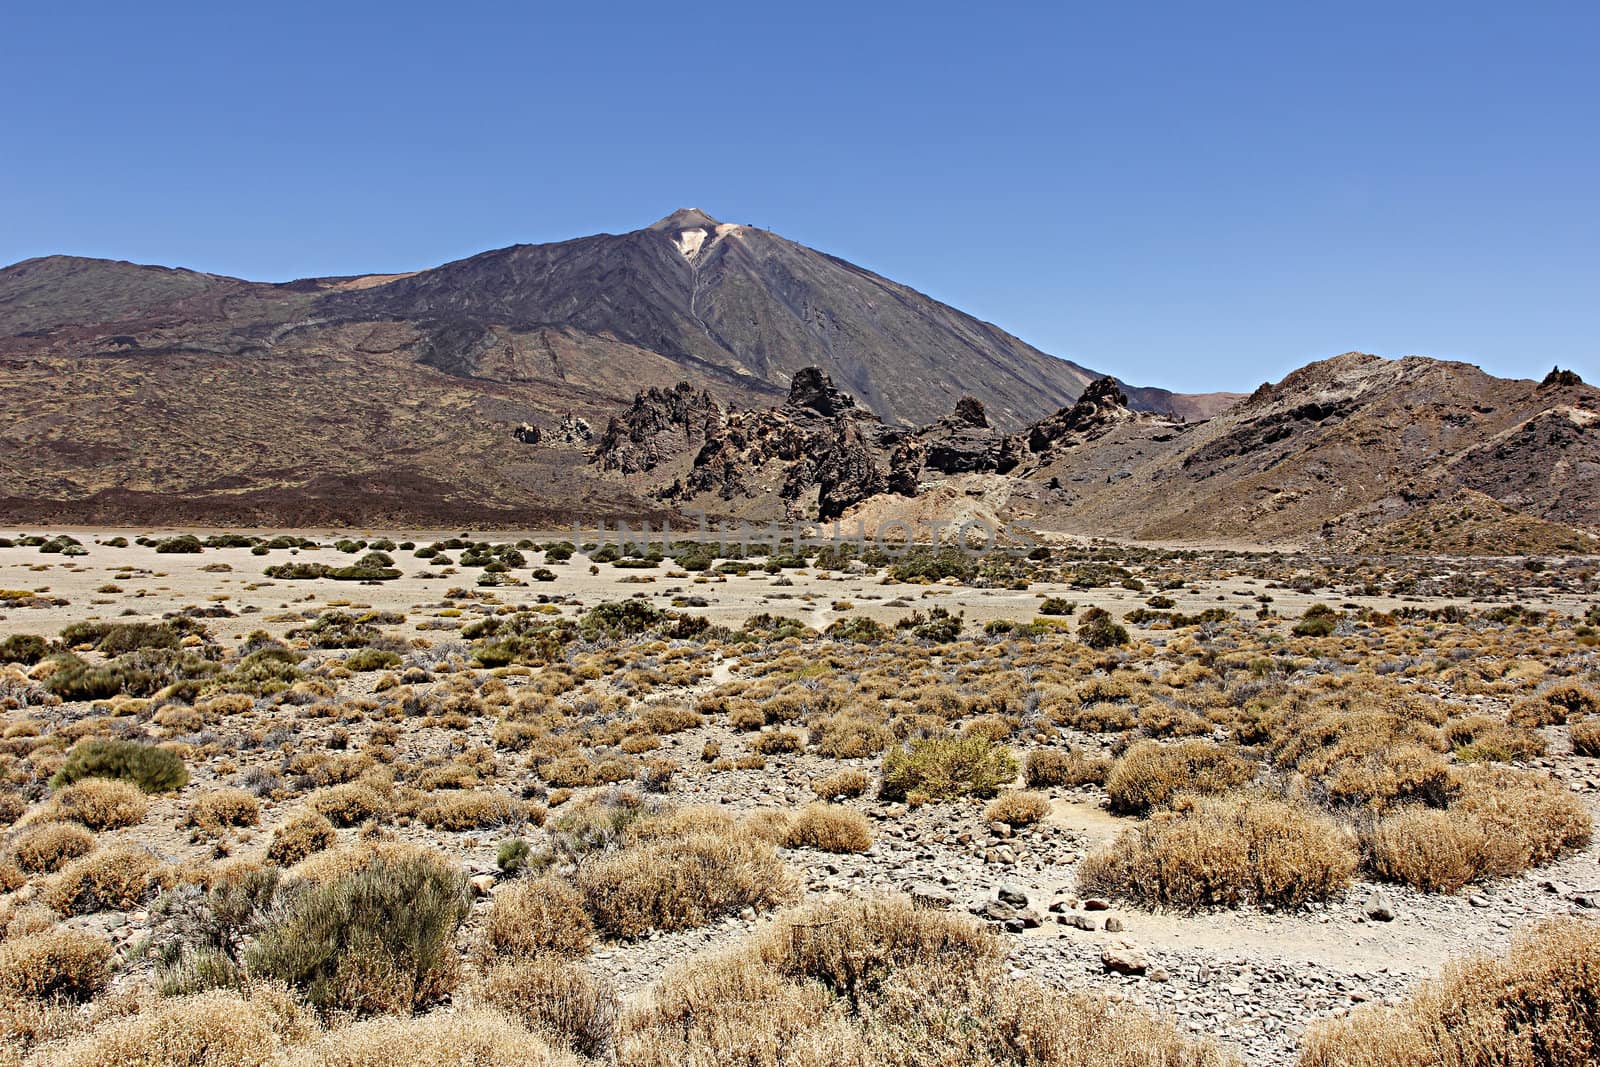 The conical volcano Mount Teide or El Teide in Tenerife is Spains highest mountain. It has featured as the location of many hollywood films and is the premier tourist attraction in the Canary islands